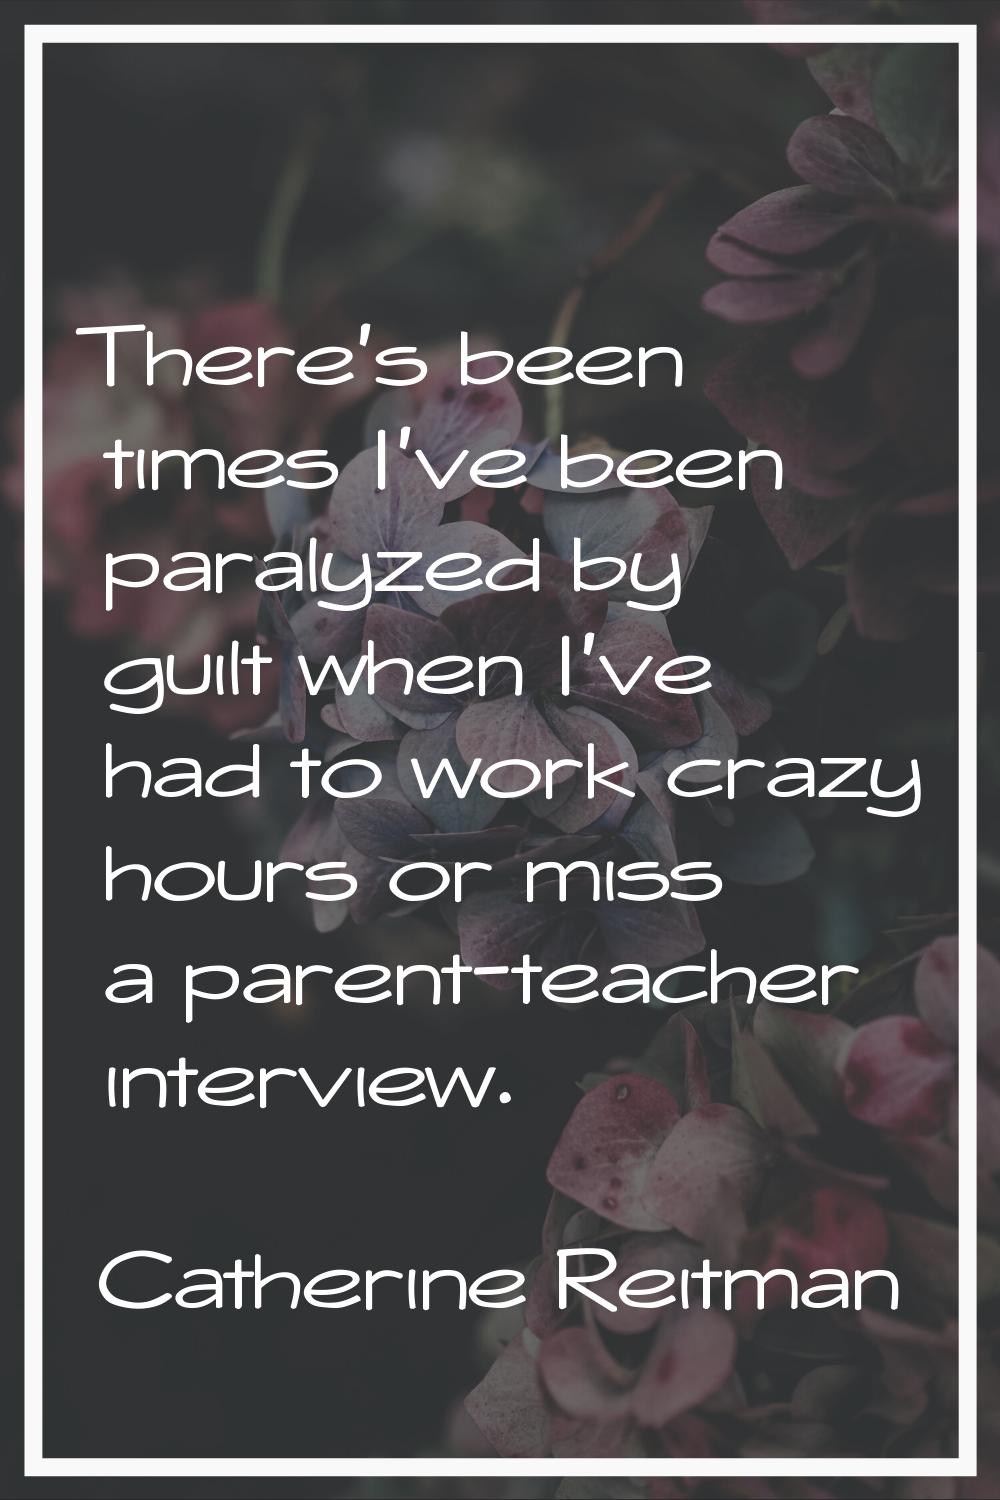 There's been times I've been paralyzed by guilt when I've had to work crazy hours or miss a parent-